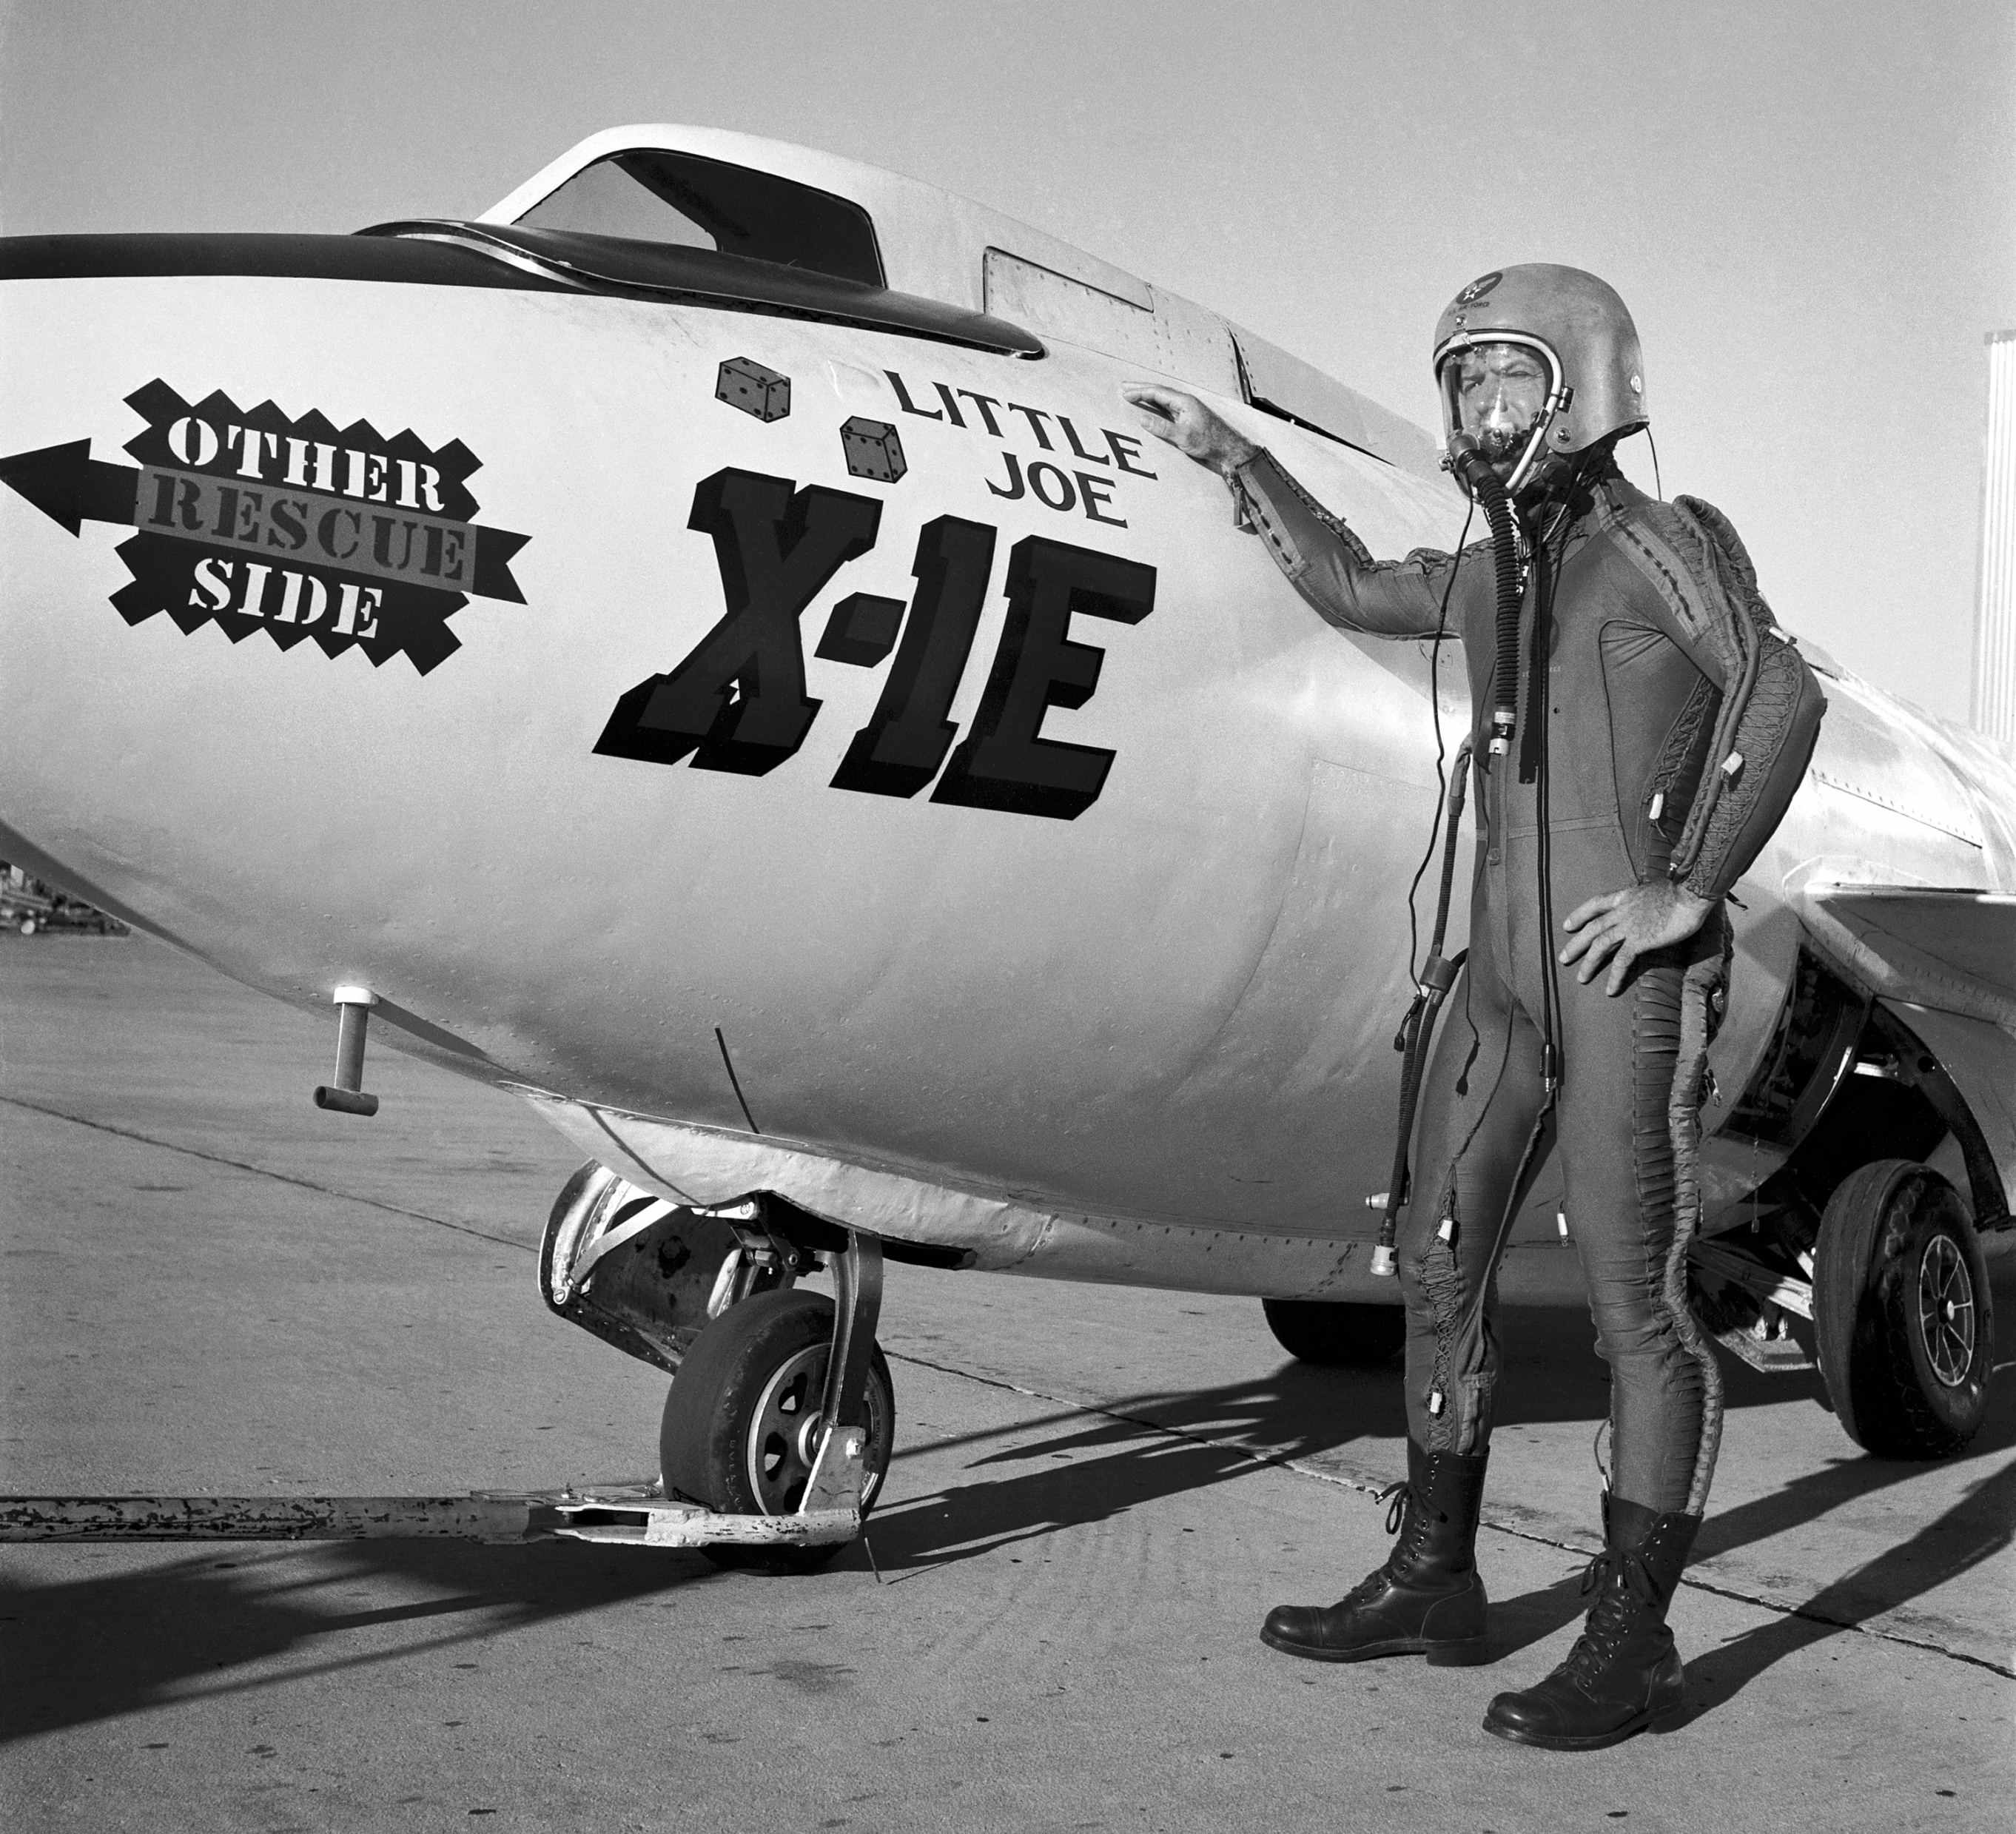 NACA test pilot Joseph Albert Walker made 21 of the X-1E's 26 flights. In this photograph, Joe Walker is wearing a David Clark Co. T-1 capstan-type partial-pressure suit with a K-1 helmet for protection at high altitudes. (NASA)